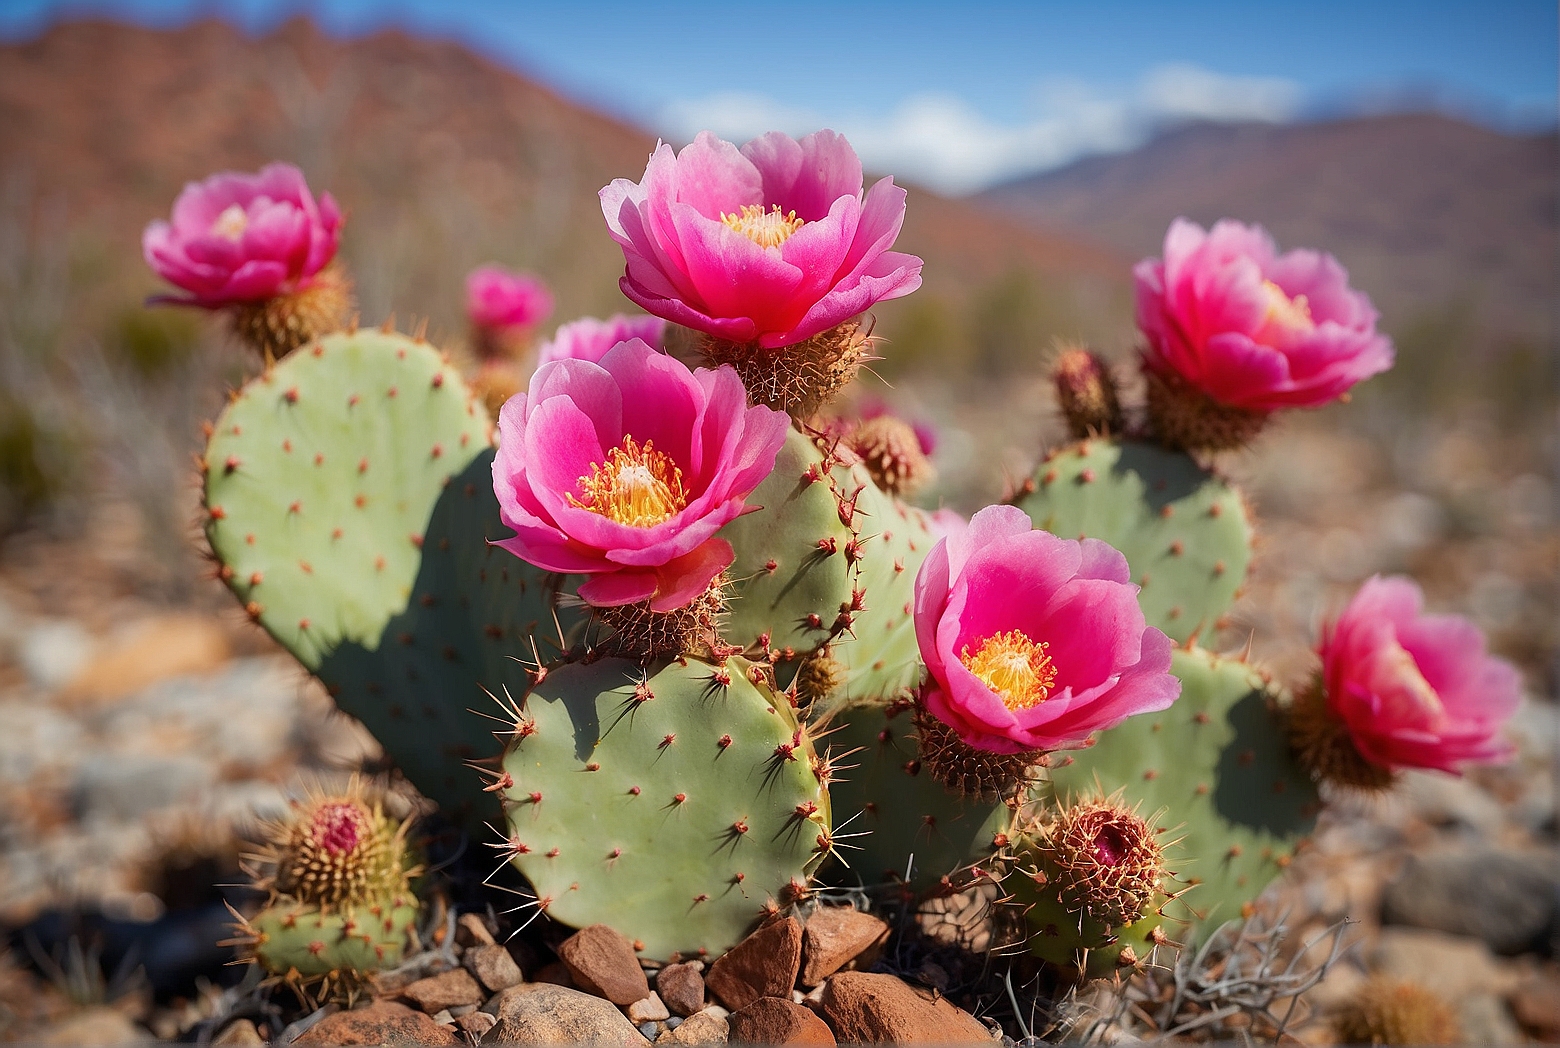 How to help a prickly pear cactus survive winter